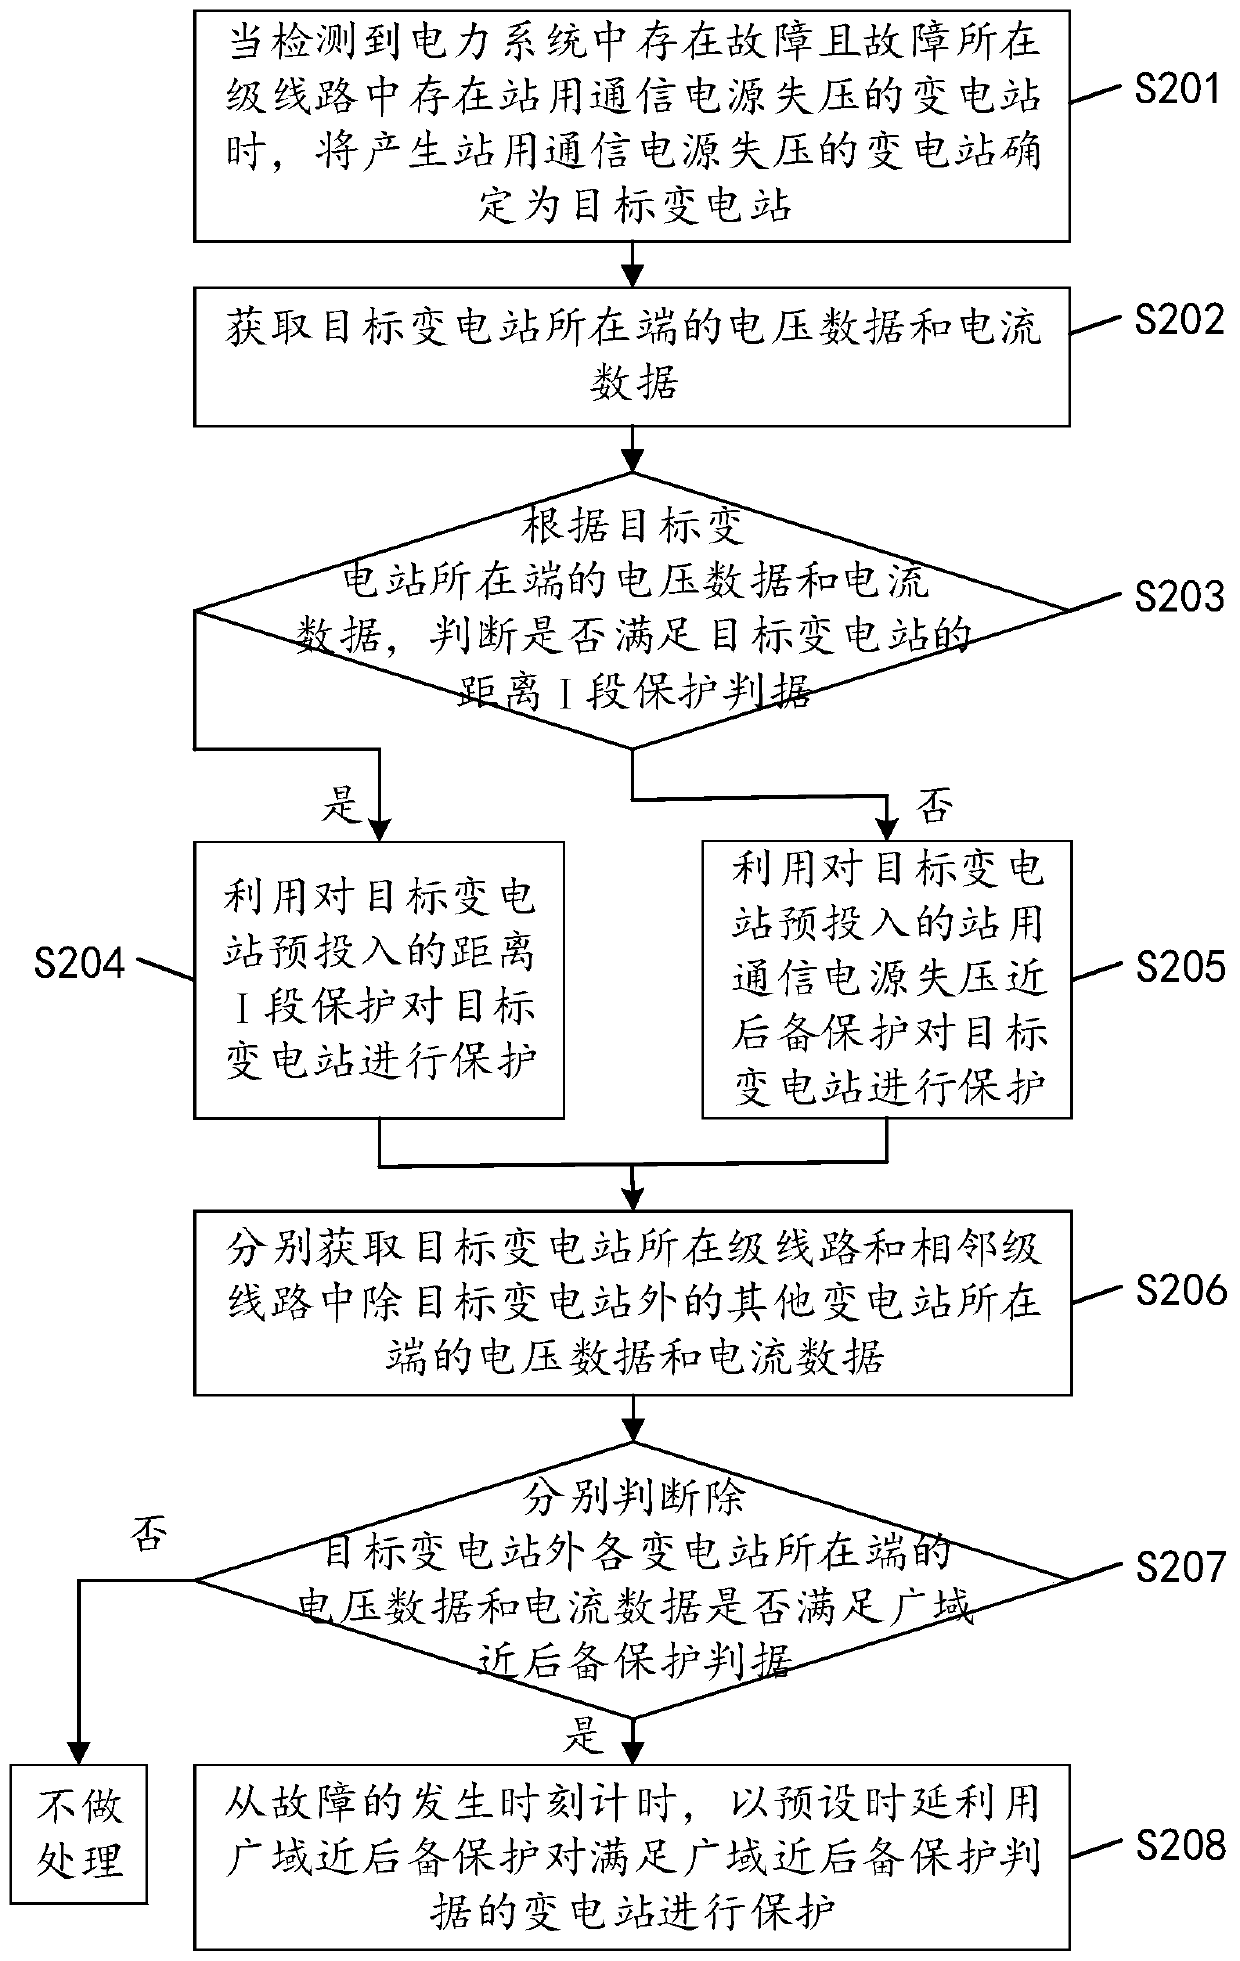 Fault clearing method, device and equipment responding to voltage loss of station communication power supply